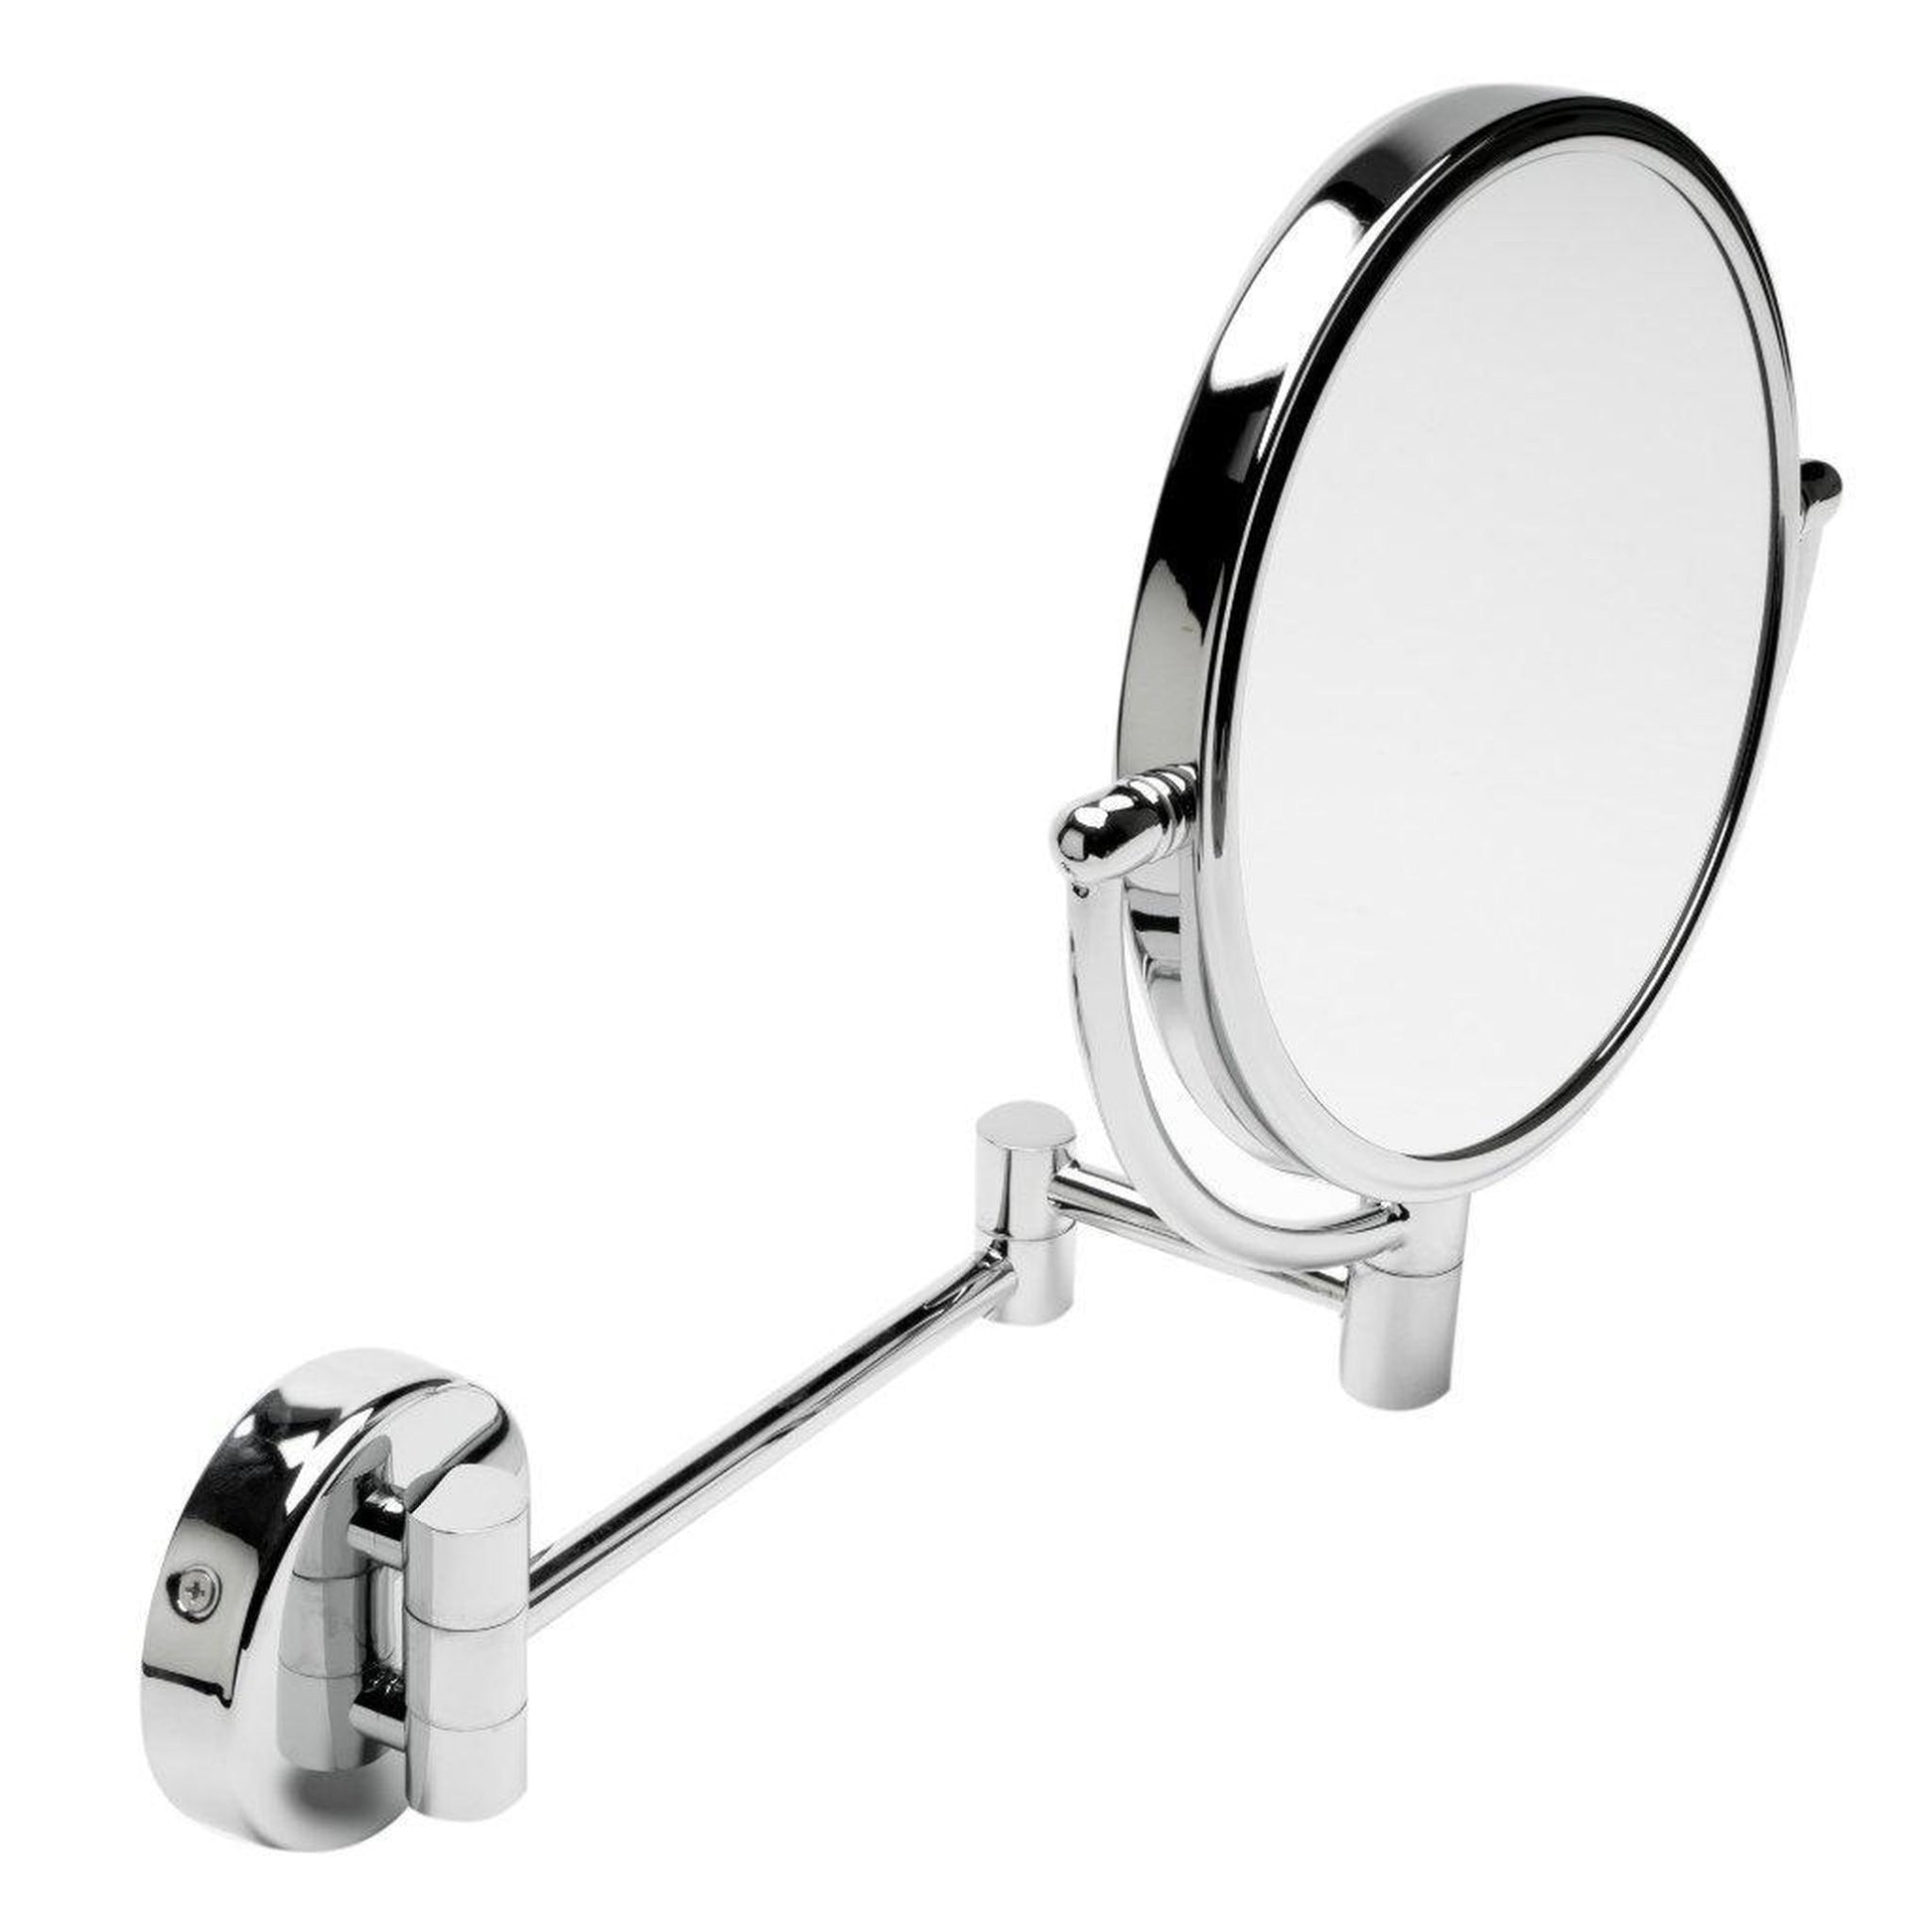 ALFI Brand ABM8WR-PC 8" Polished Chrome Wall-Mounted Round 5x Magnifying Cosmetic Mirror